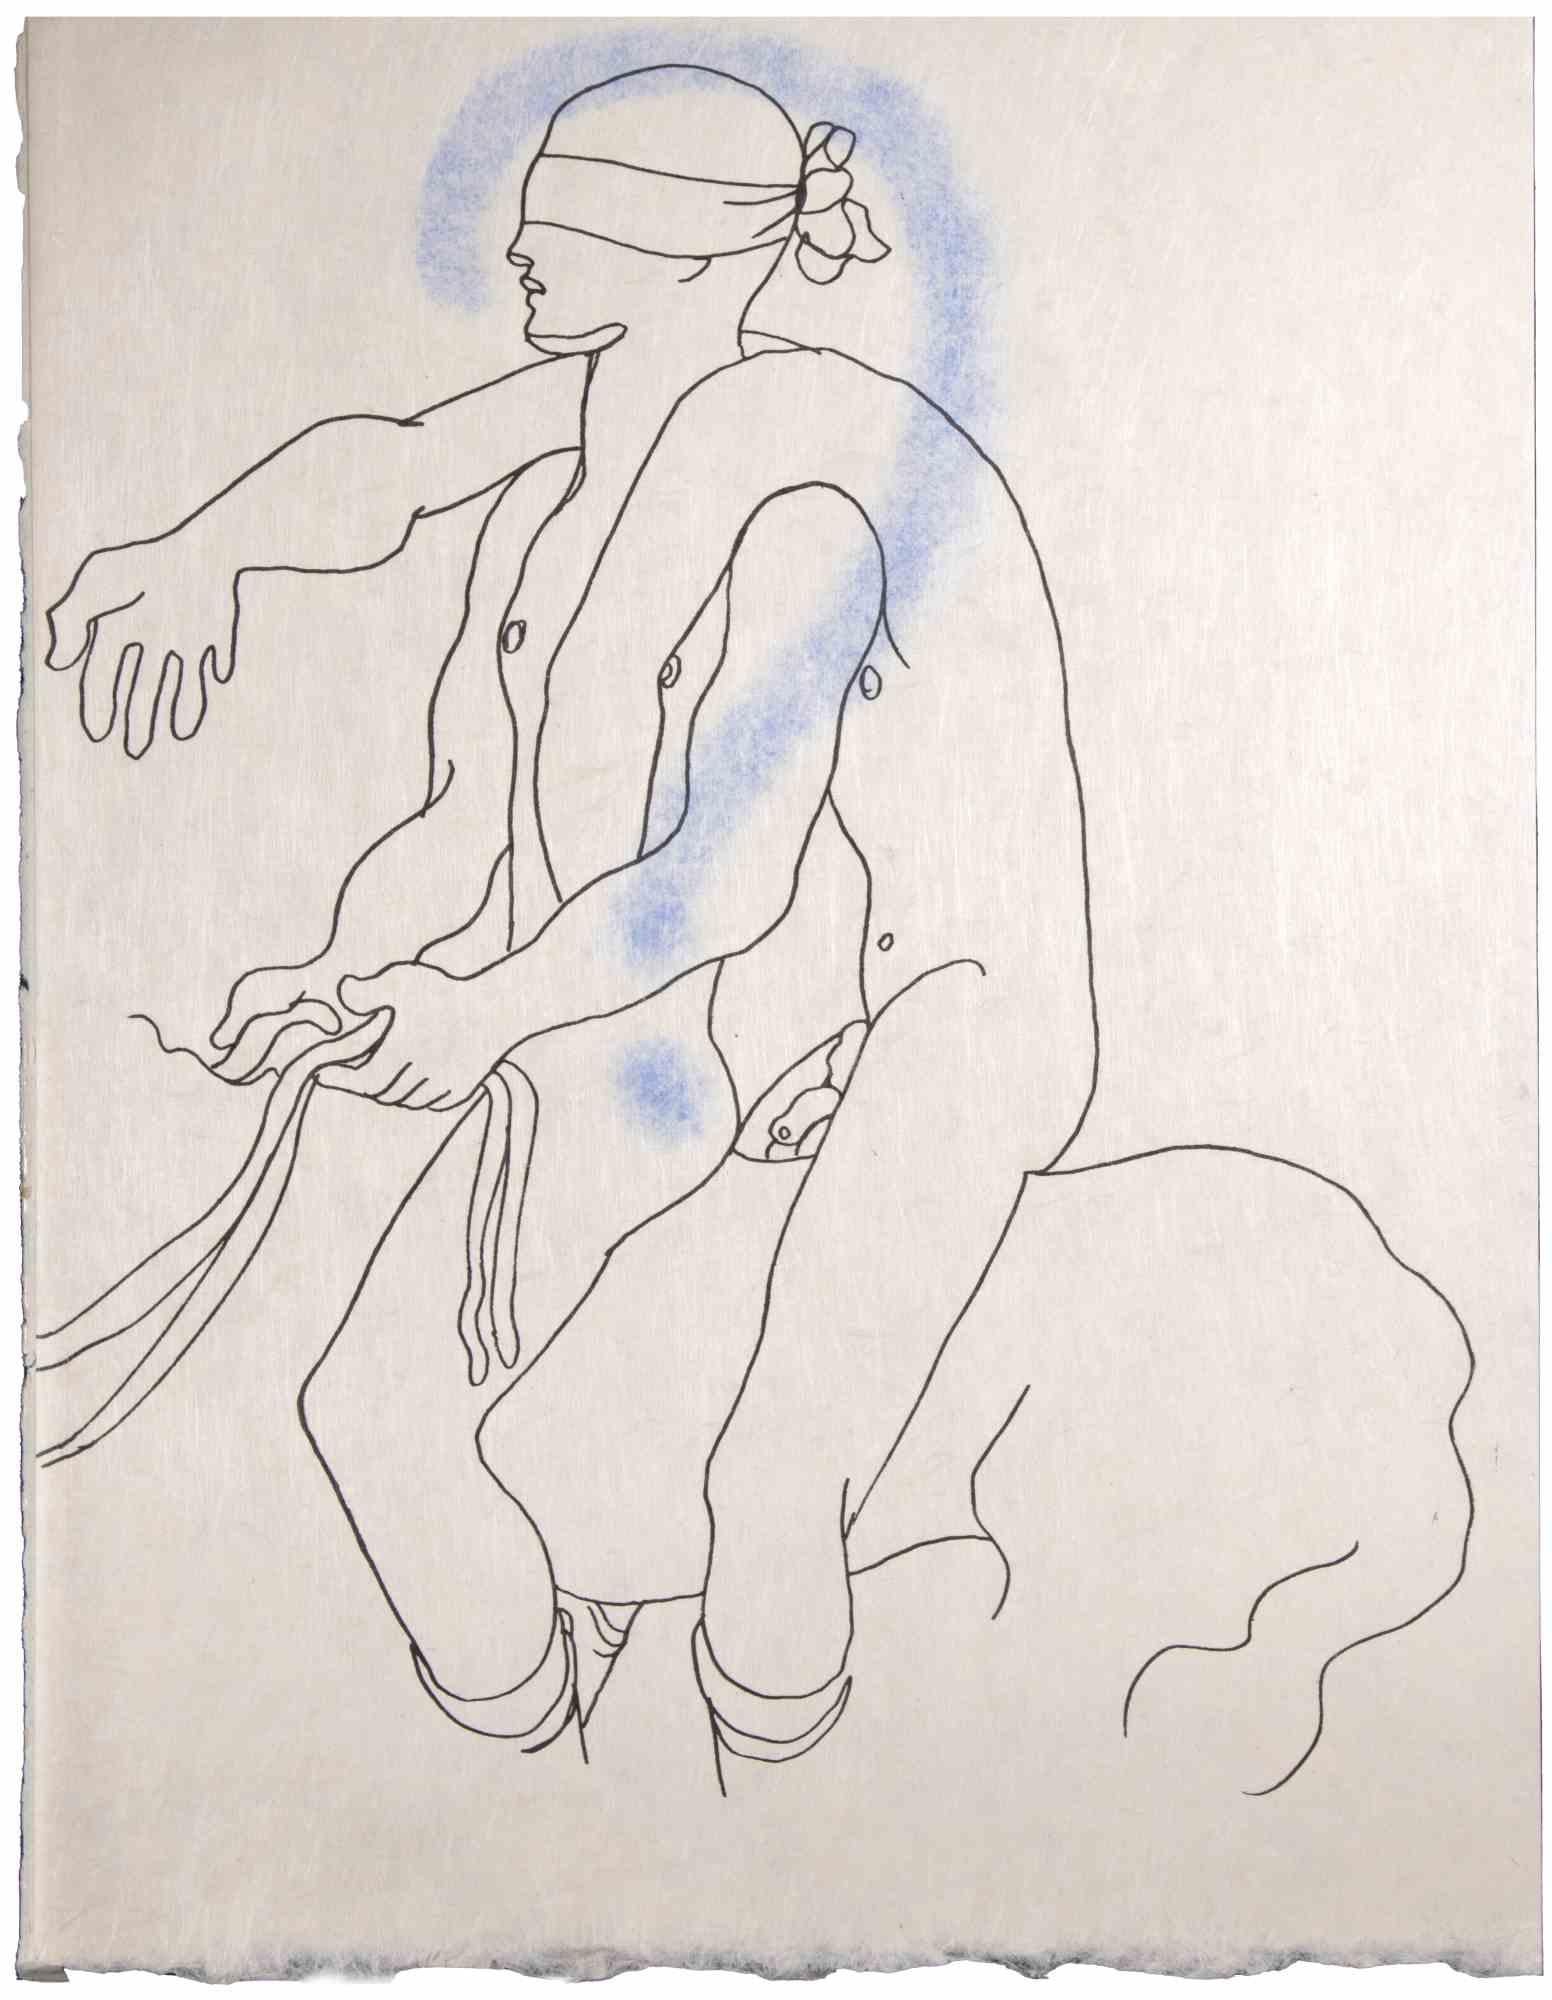 Riders is a  Colored lithograph realized on japan paper by Jean Cocteau (1889 -1963) in 1930 ca. French draftsman, poet, essayist, playwright, librettist, film director.

Excellent condition, no signature.

The artwork represents a portrait of a